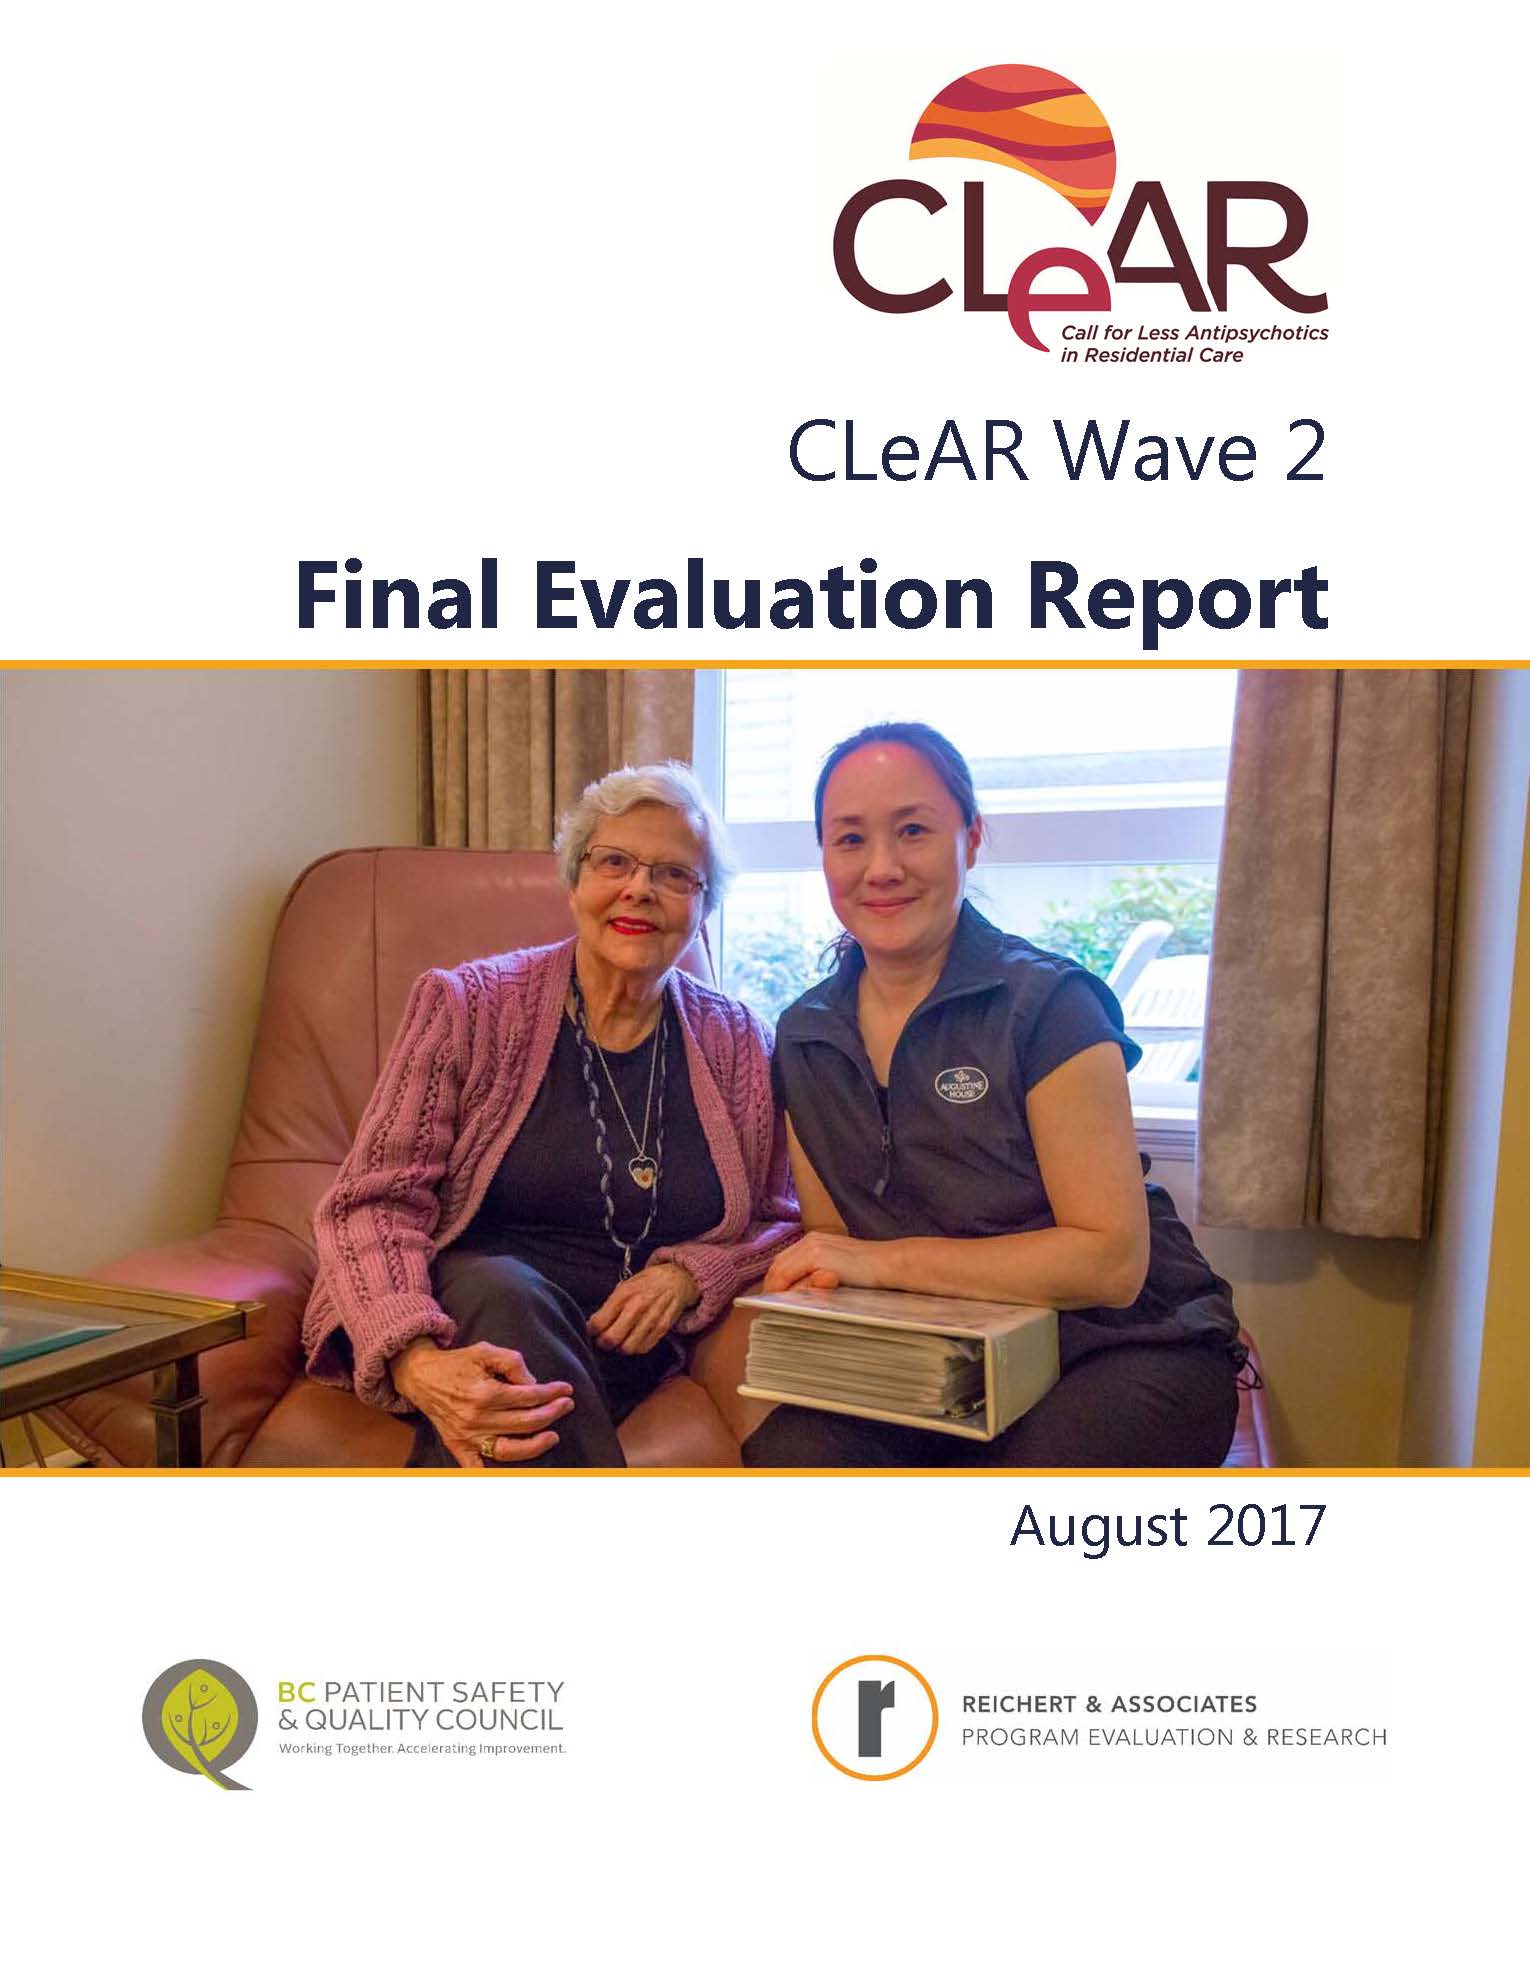 2017-CLeAR-Wave-2-Evaluation-Report-Aug-3-2017_FINAL Cover